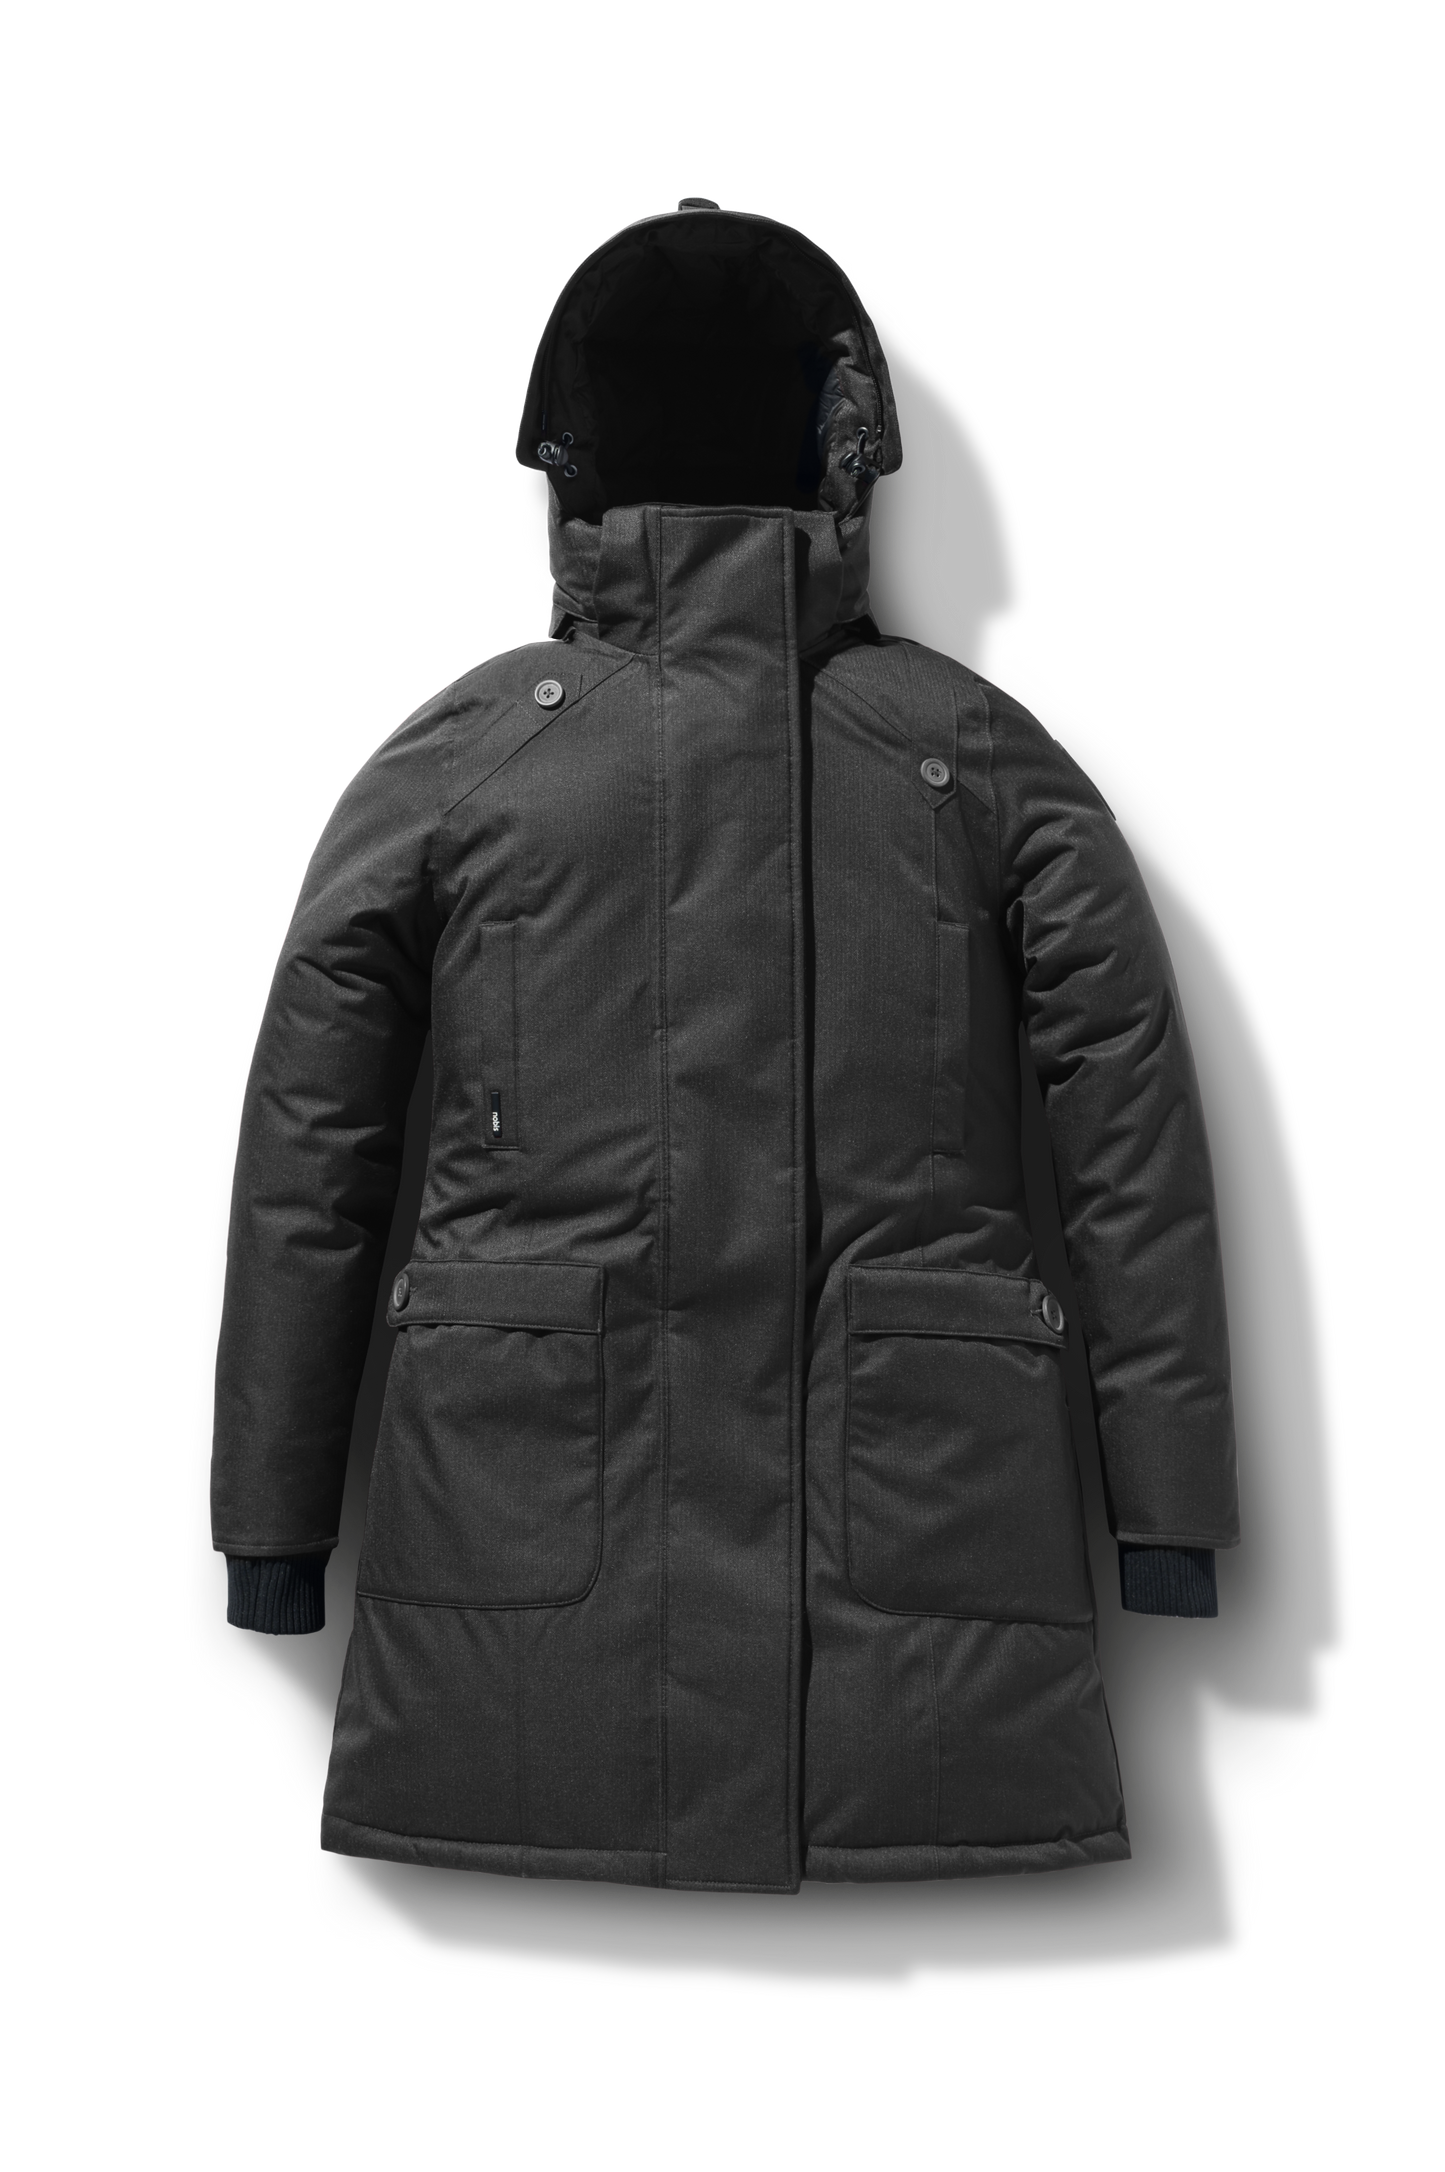 Merideth Furless Ladies Parka in thigh length, Canadian white duck down insulation, removable down-filled hood, centre-front two-way zipper with magnetic wind flap closure, four exterior pockets, and elastic ribbed cuffs, in Black